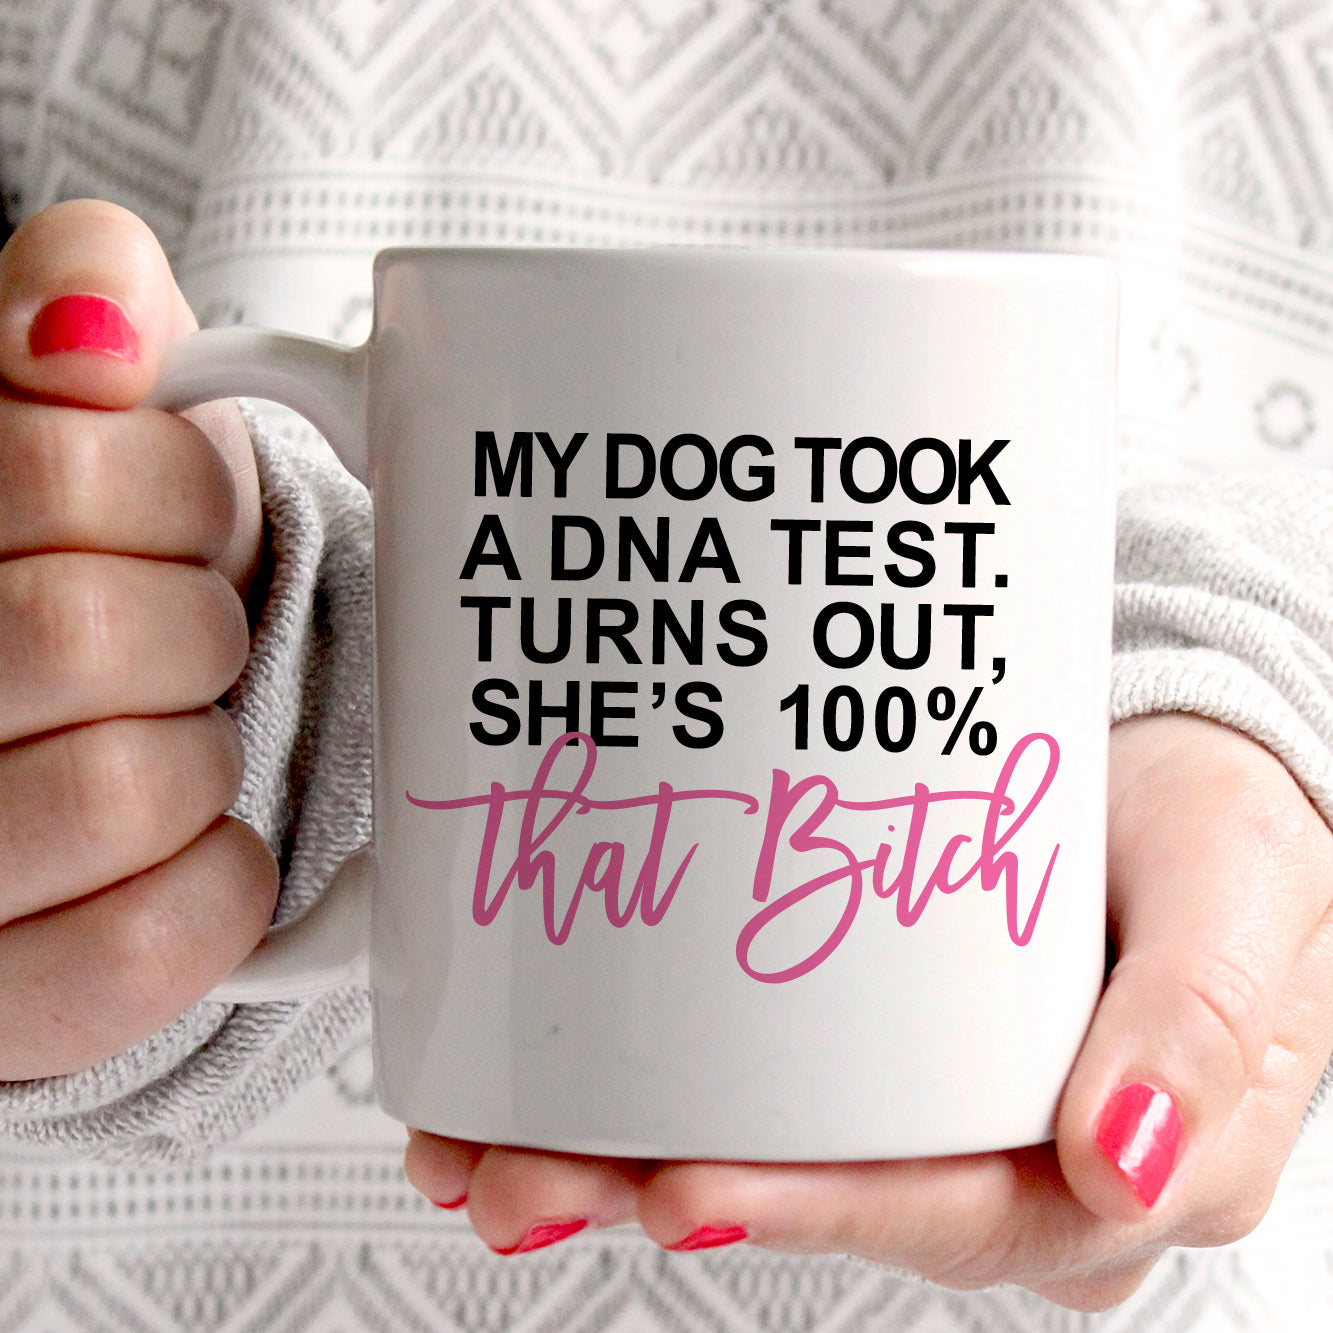 My Dog Just Took a DNA Test Turns Out She's 100% That Bitch | funny pet mug | rescue dog | PIPSY.COM